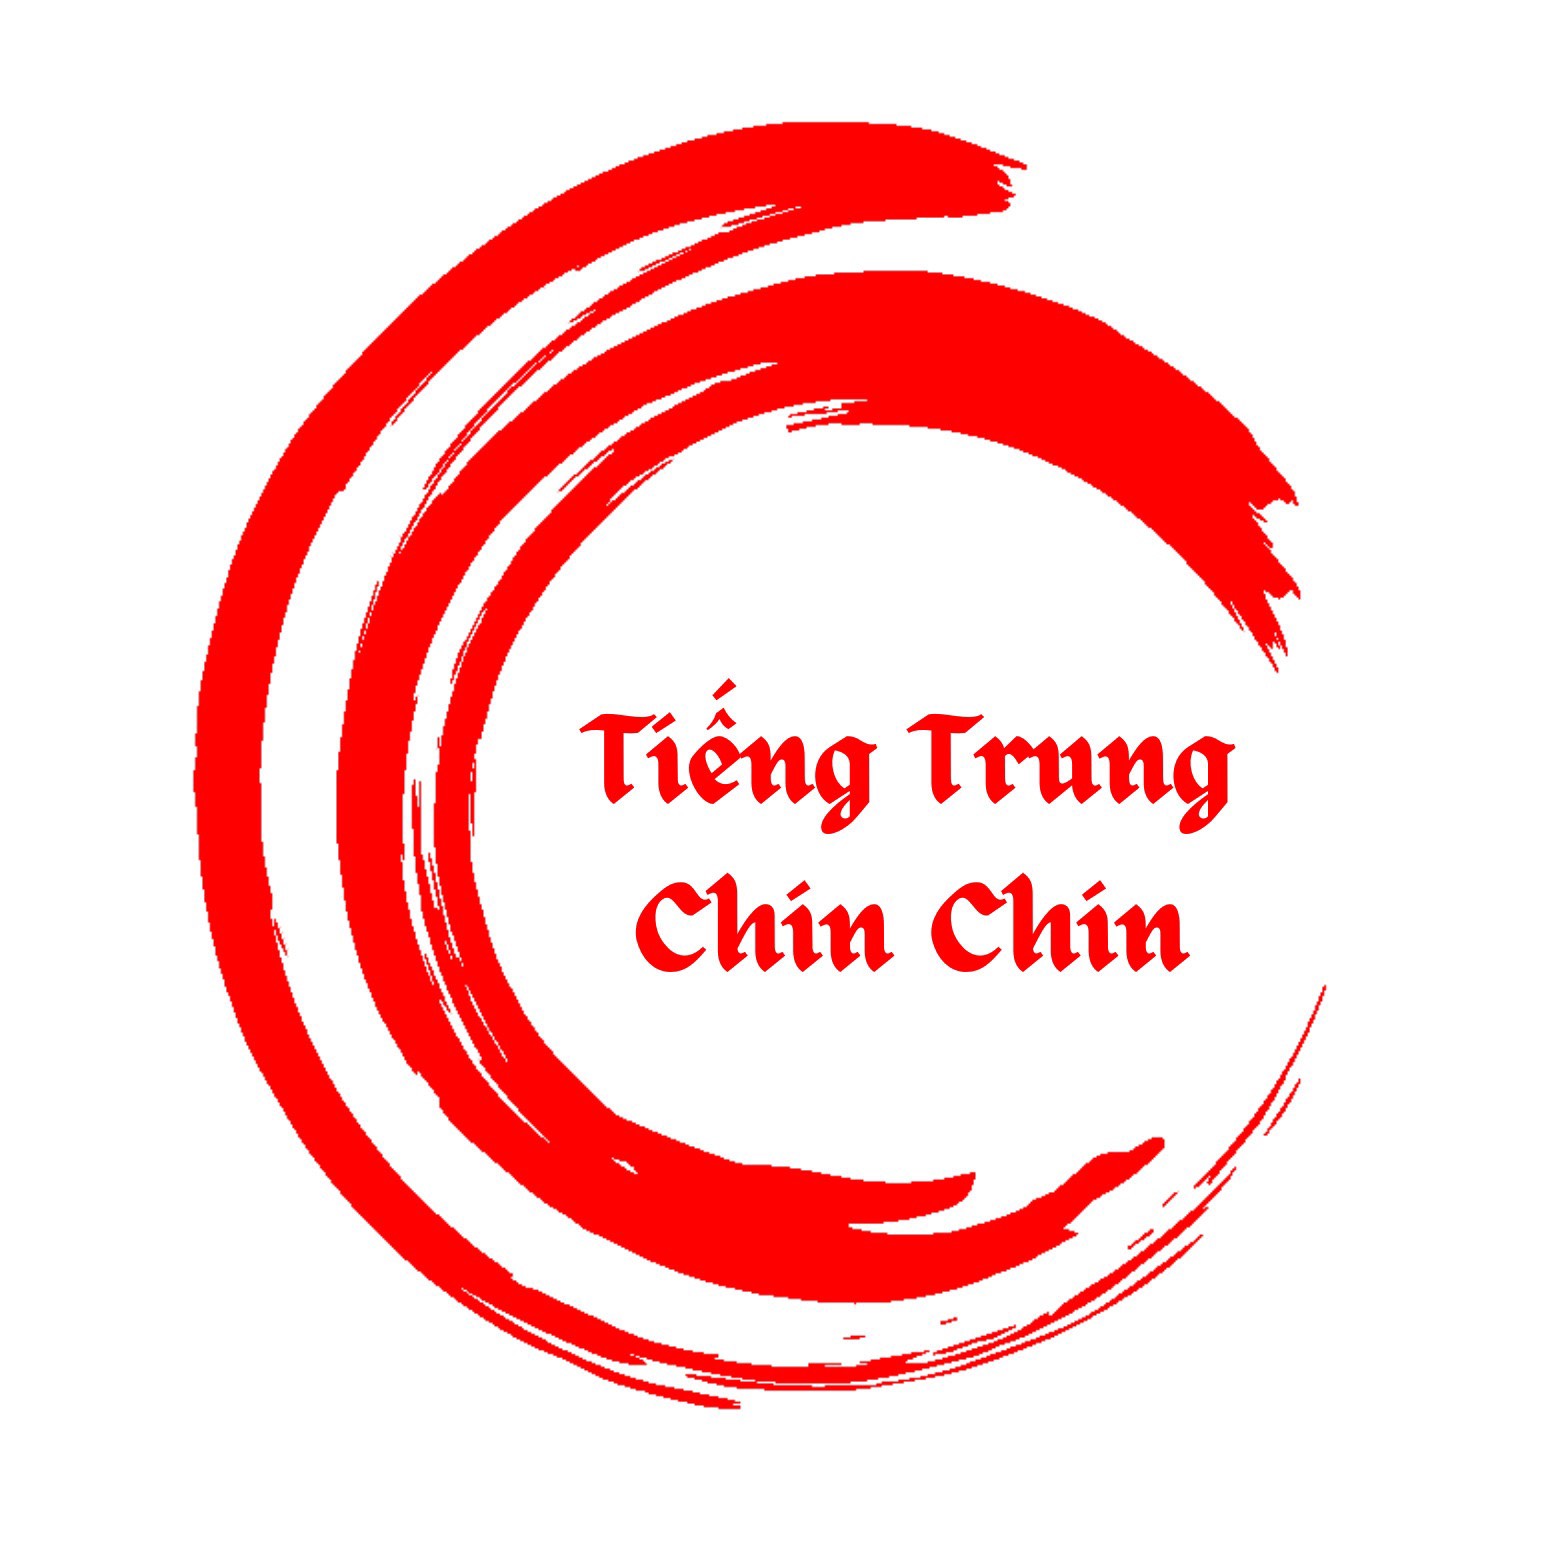 Tiếng Trung Chin Chin - Tiếng Trung Thực Tế ☎️ 0364 129 694 #tiengtrunggiaotiep #tiengtrungchinchin #hskonline #studywithme #tiengtrungonline #chineselearning #tiengtrungonline #tiengtrungtainha #giaotieptiengtrung